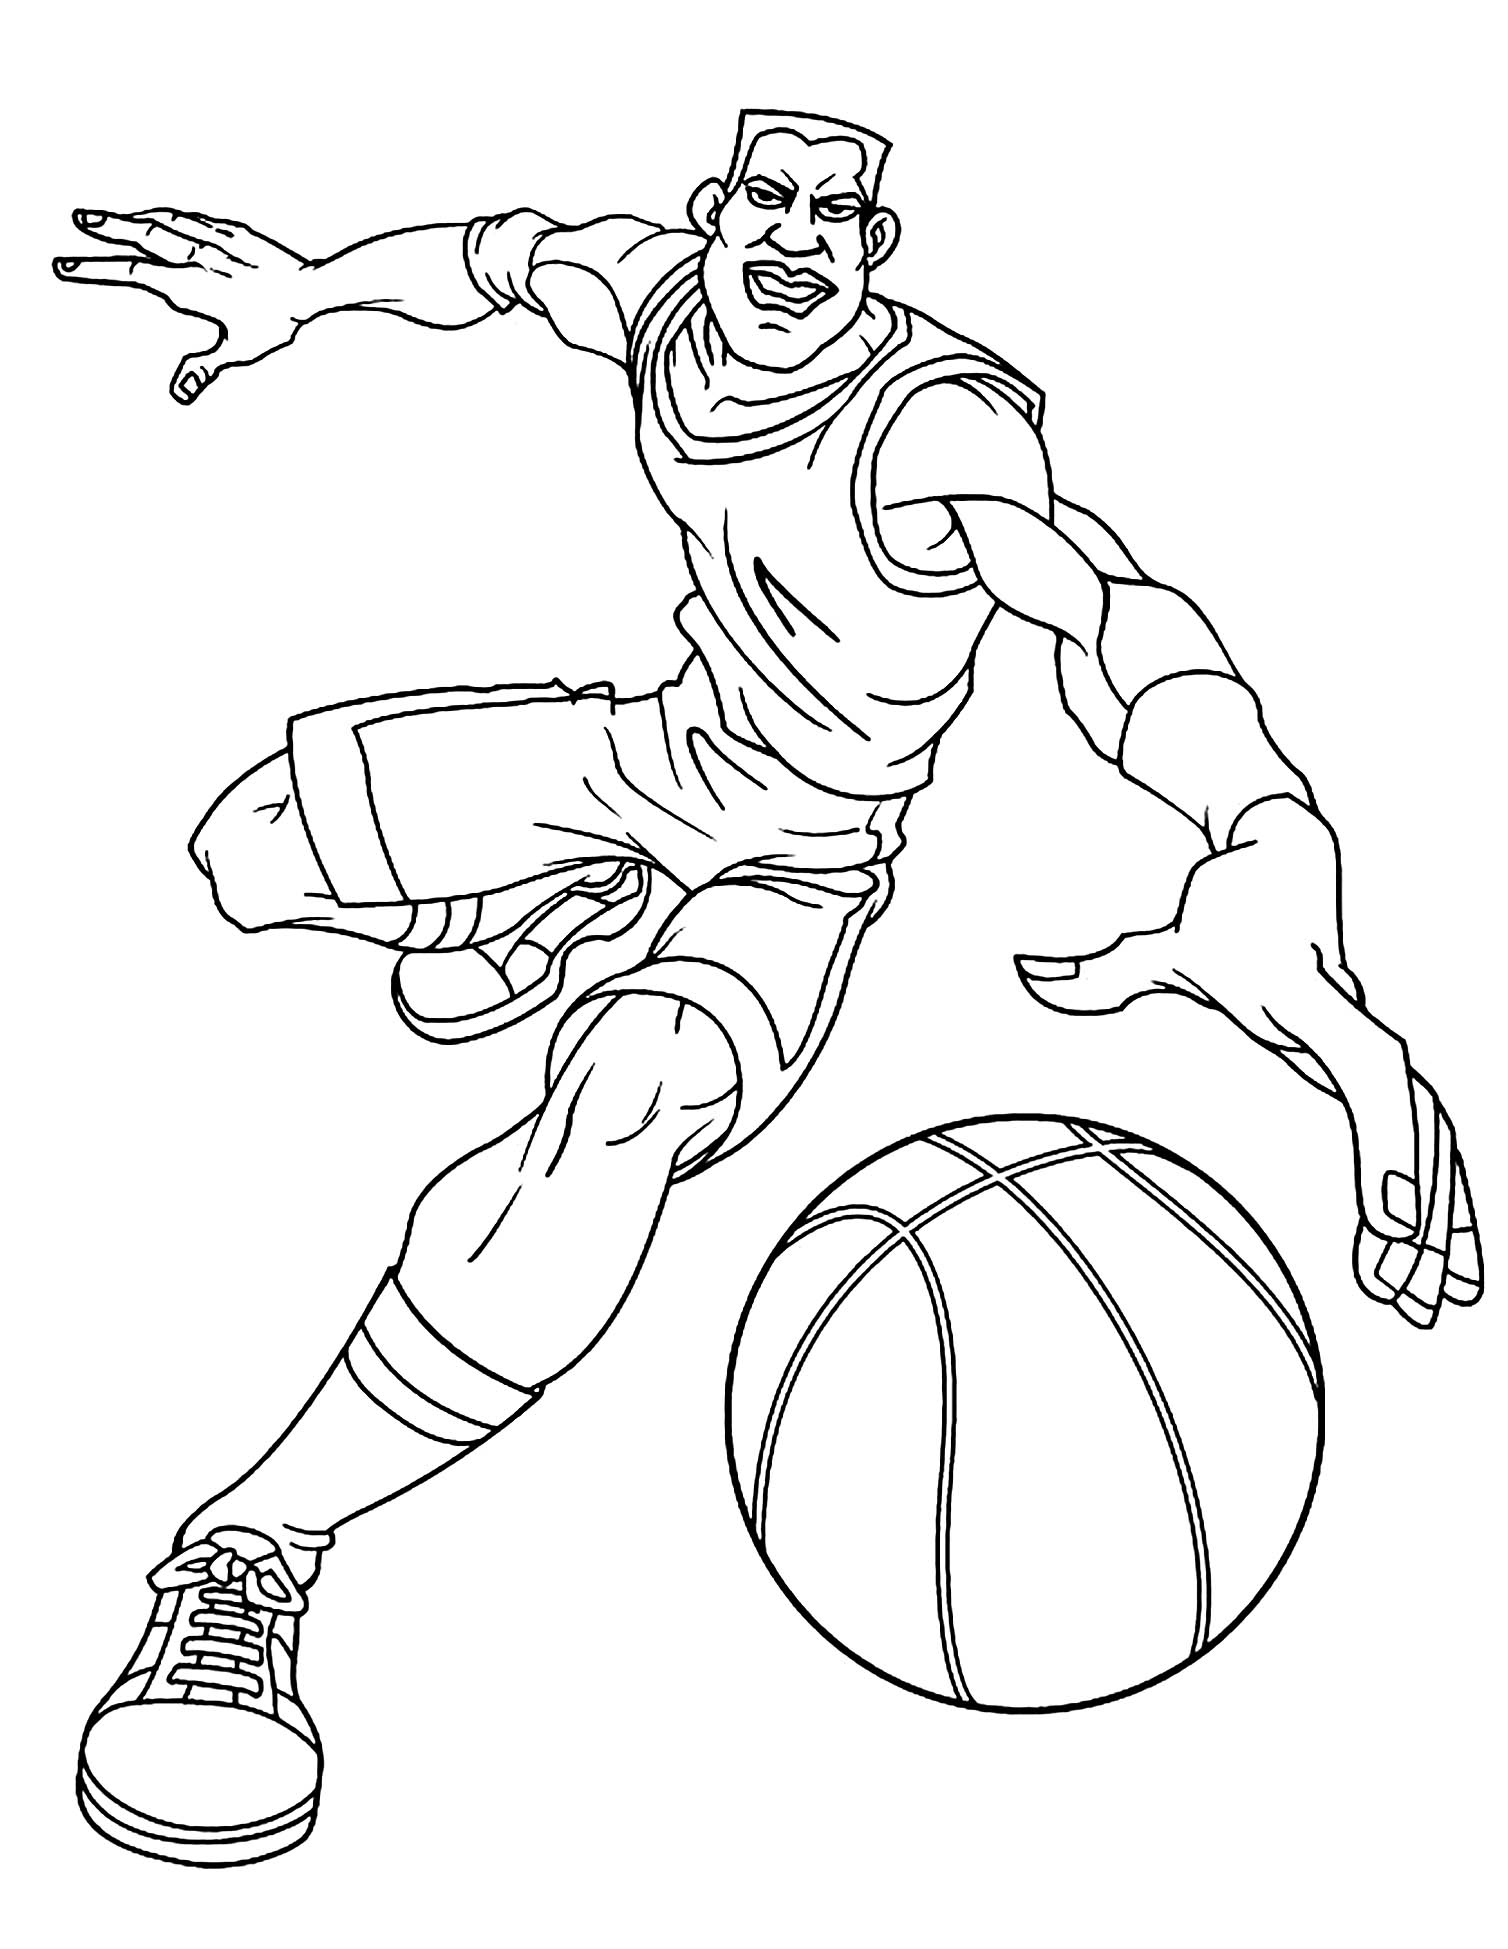 Basketball coloring pages to download - Basketball Kids Coloring Pages